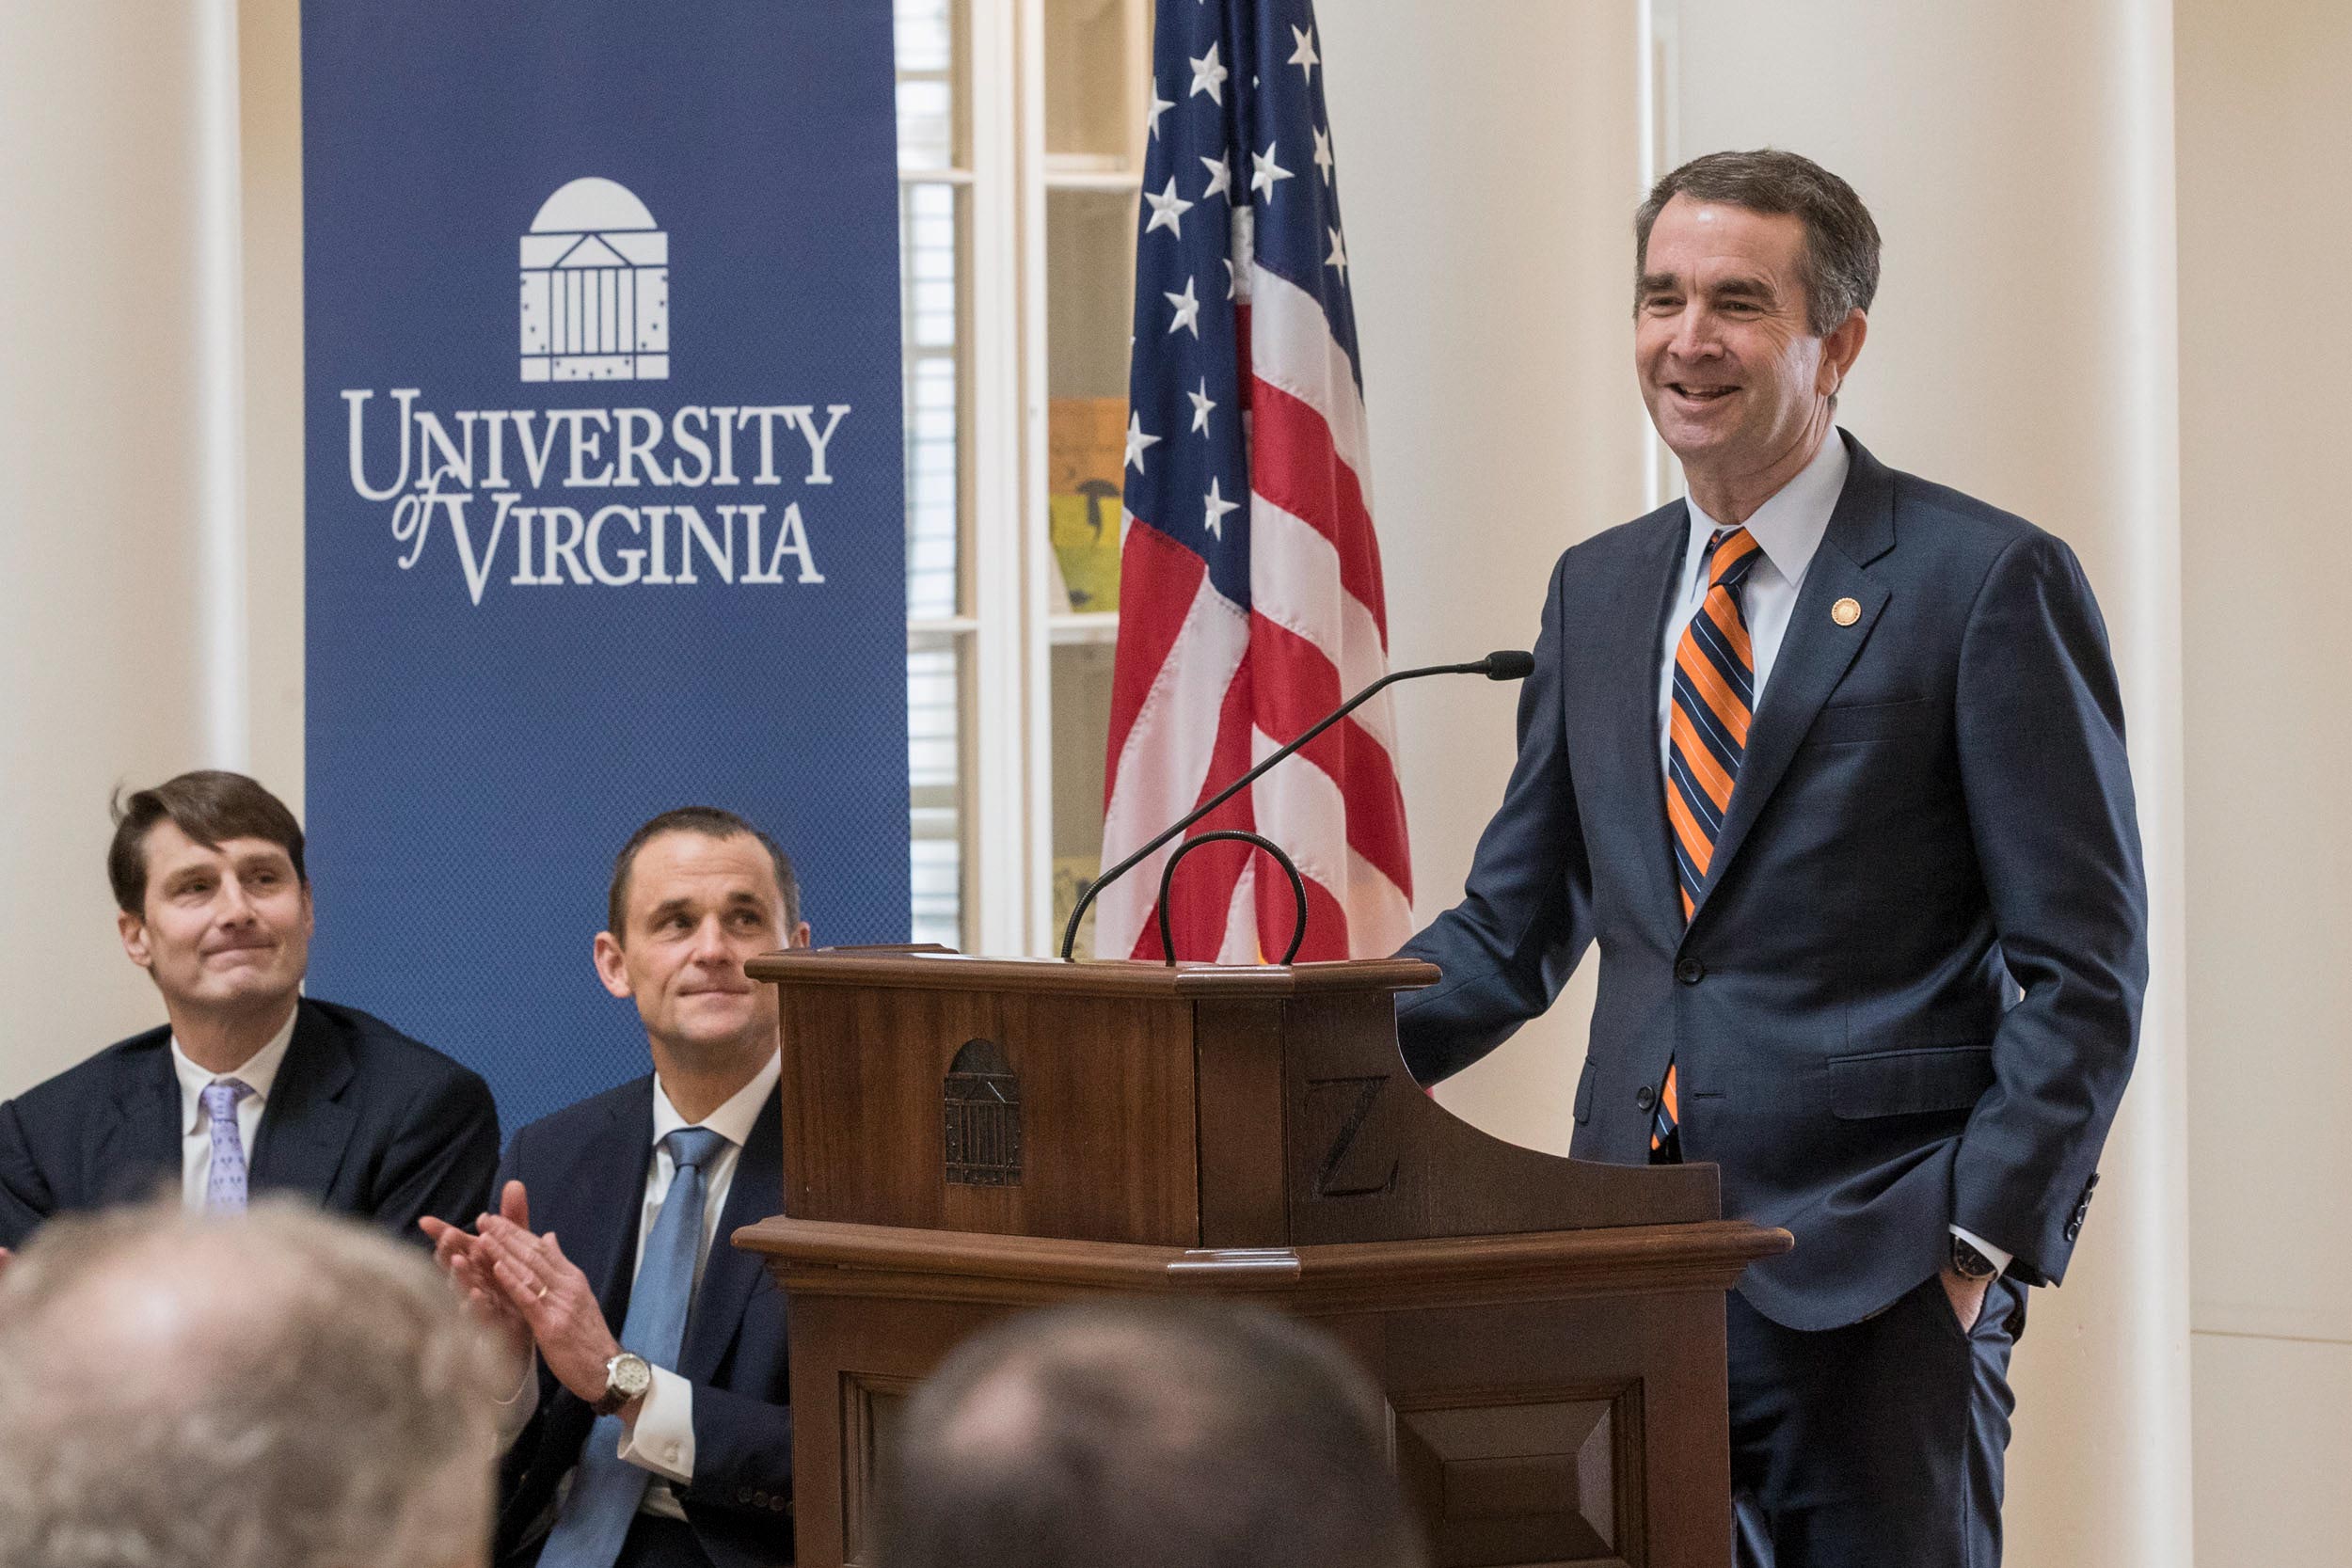 Ralph Northam giving a speech at the podium in the Rotunda